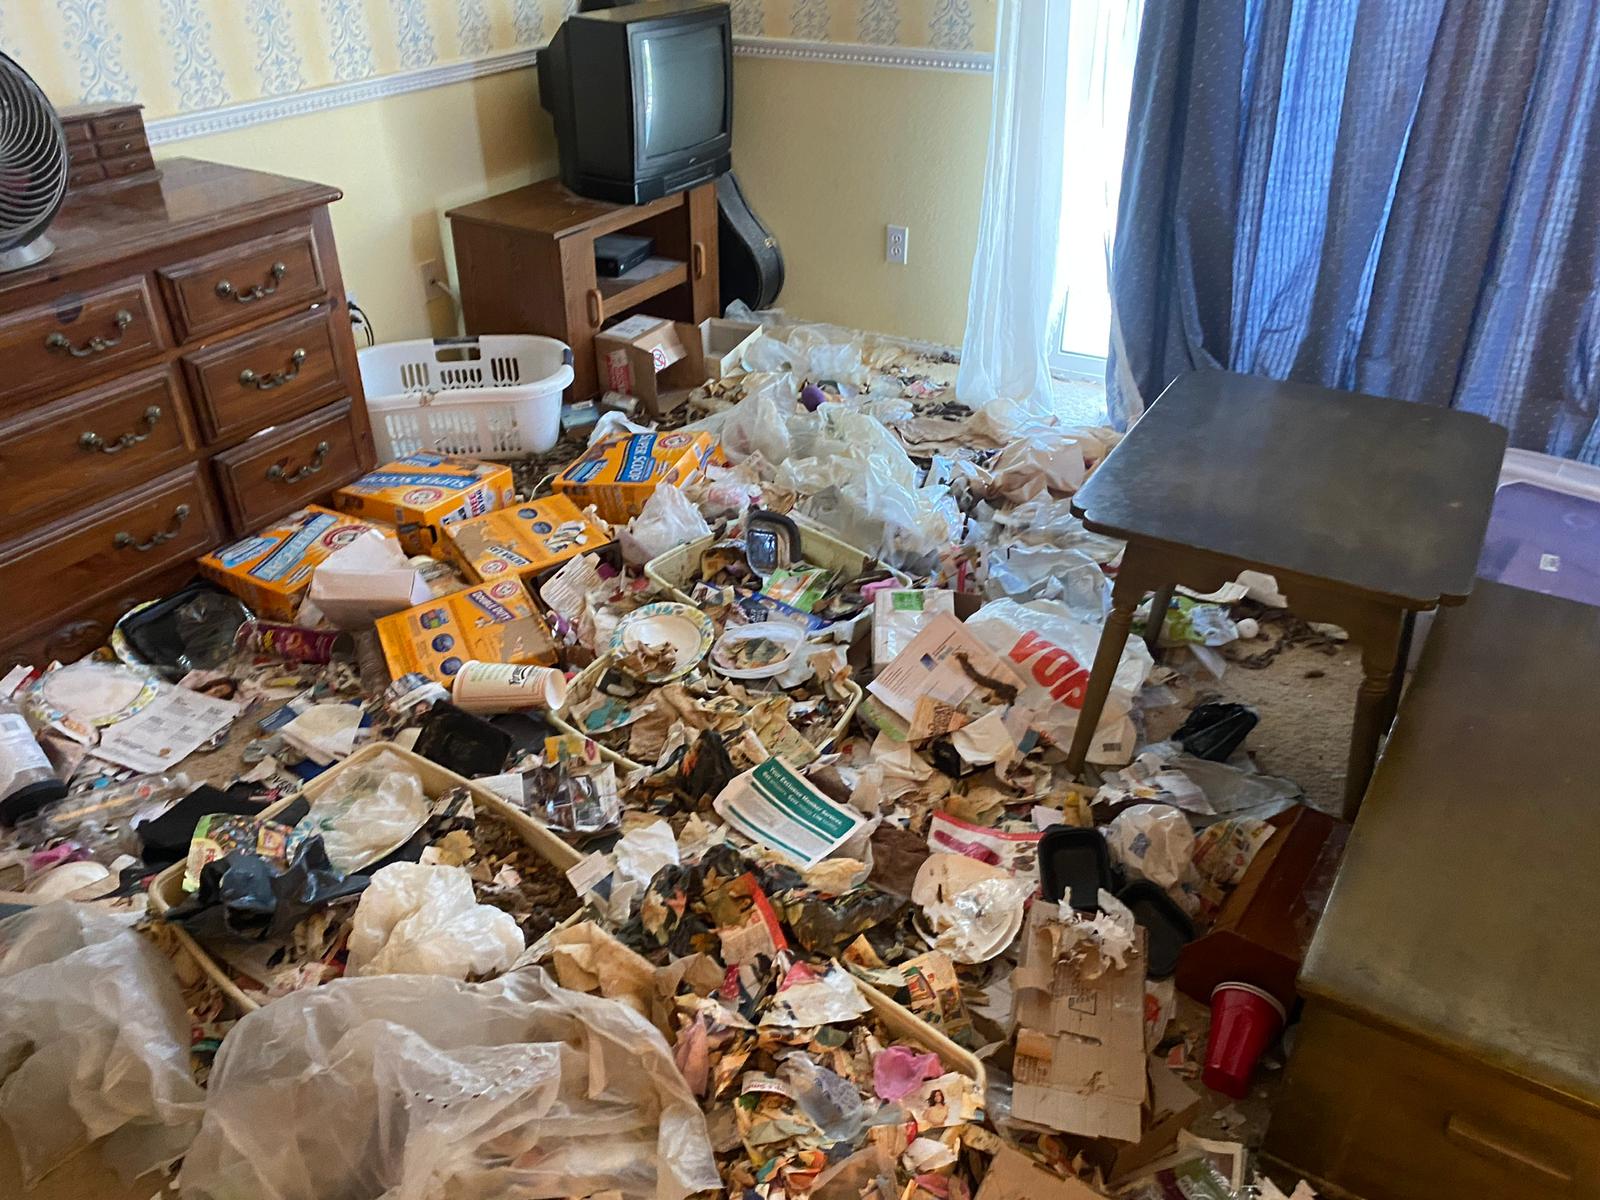 Image shows a living room area where the floor is covered with filth, food waste and trash. It's almost impossible to walk among the junk.